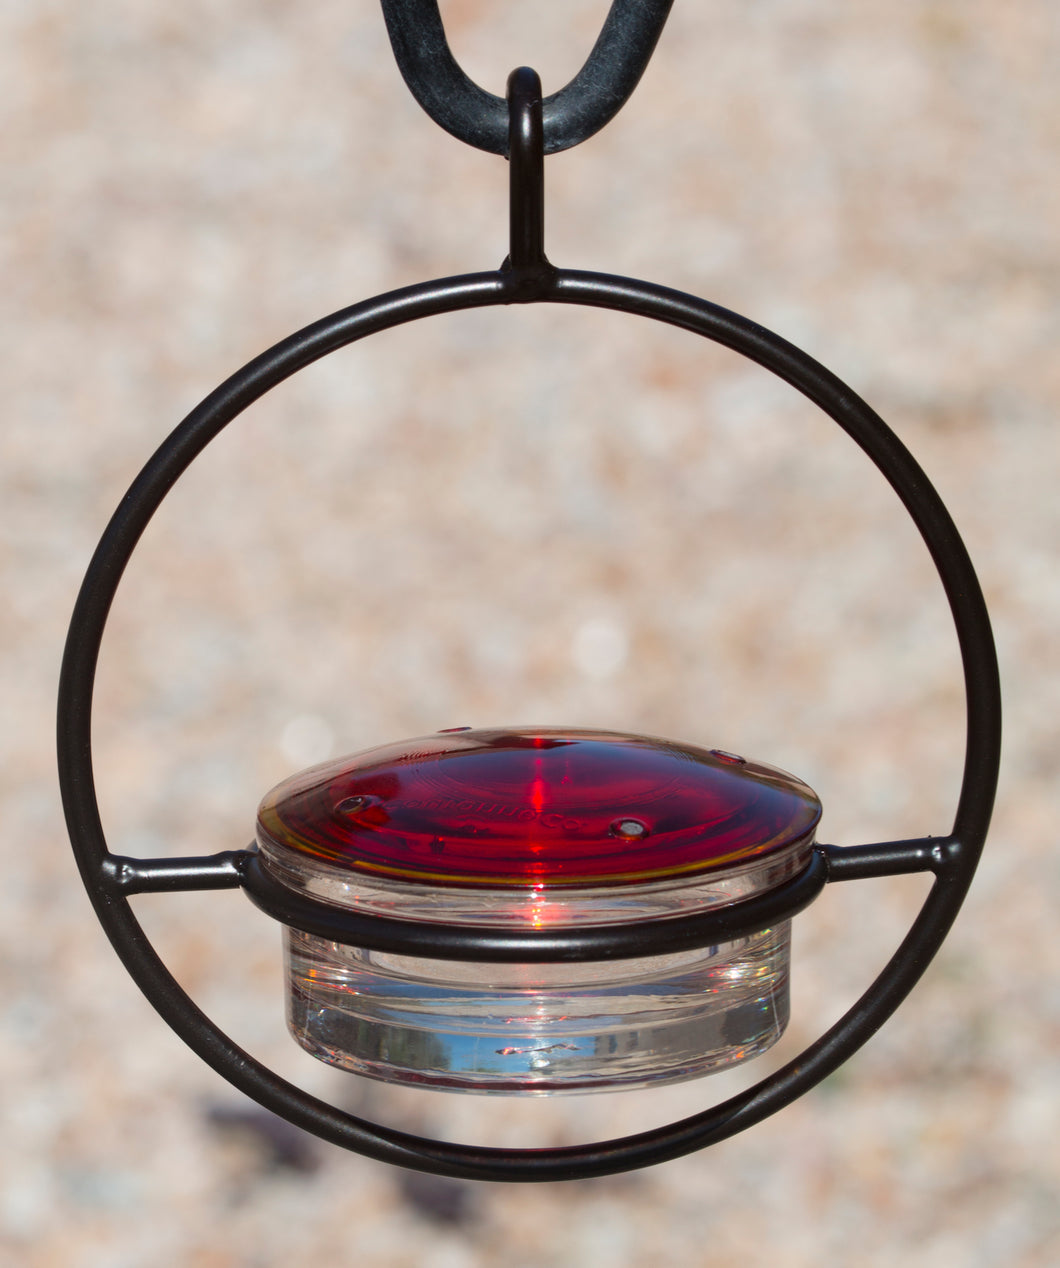 Beautiful Small Glass Hanging Hummingbird Feeder - Attracts Hummers Like Crazy!